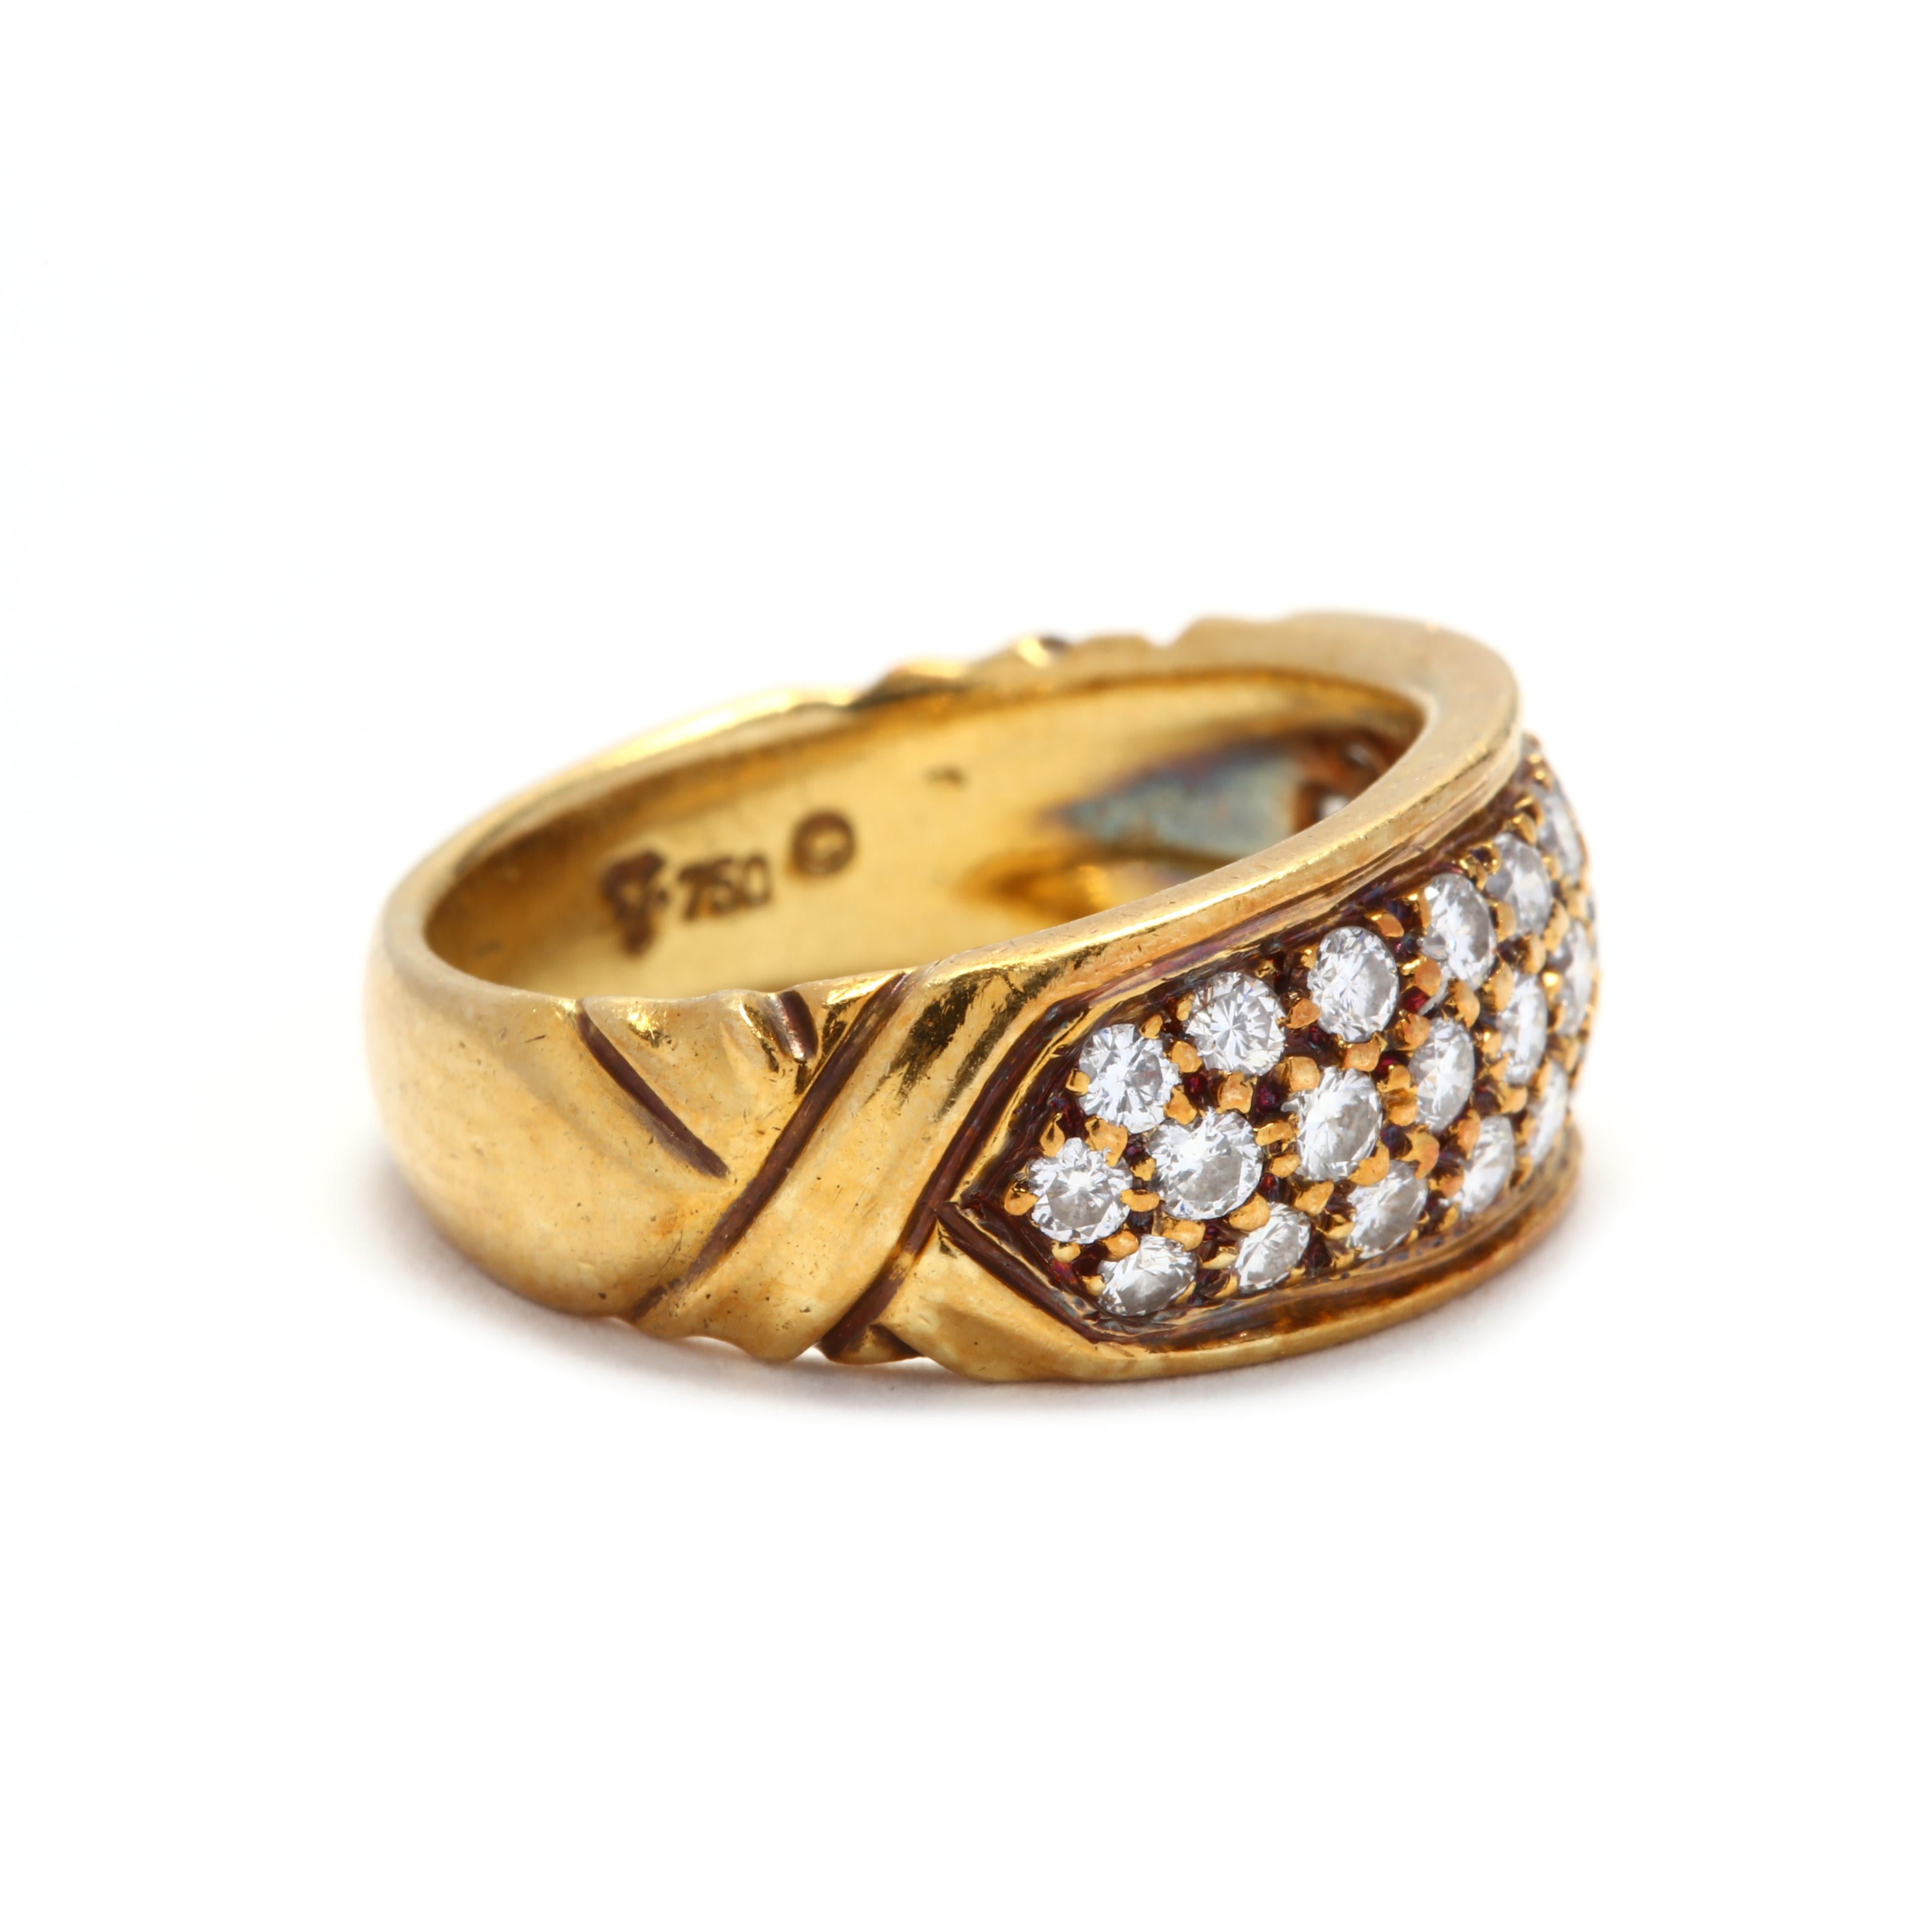 Vintage 18 karat yellow gold and diamond band. A slightly tapered band with three rows of pavé set, full cut round diamonds weighing approximately .81 total carat and with a crisscross motif on the shank.

Stones:
- diamonds, 31 stones
- full cut